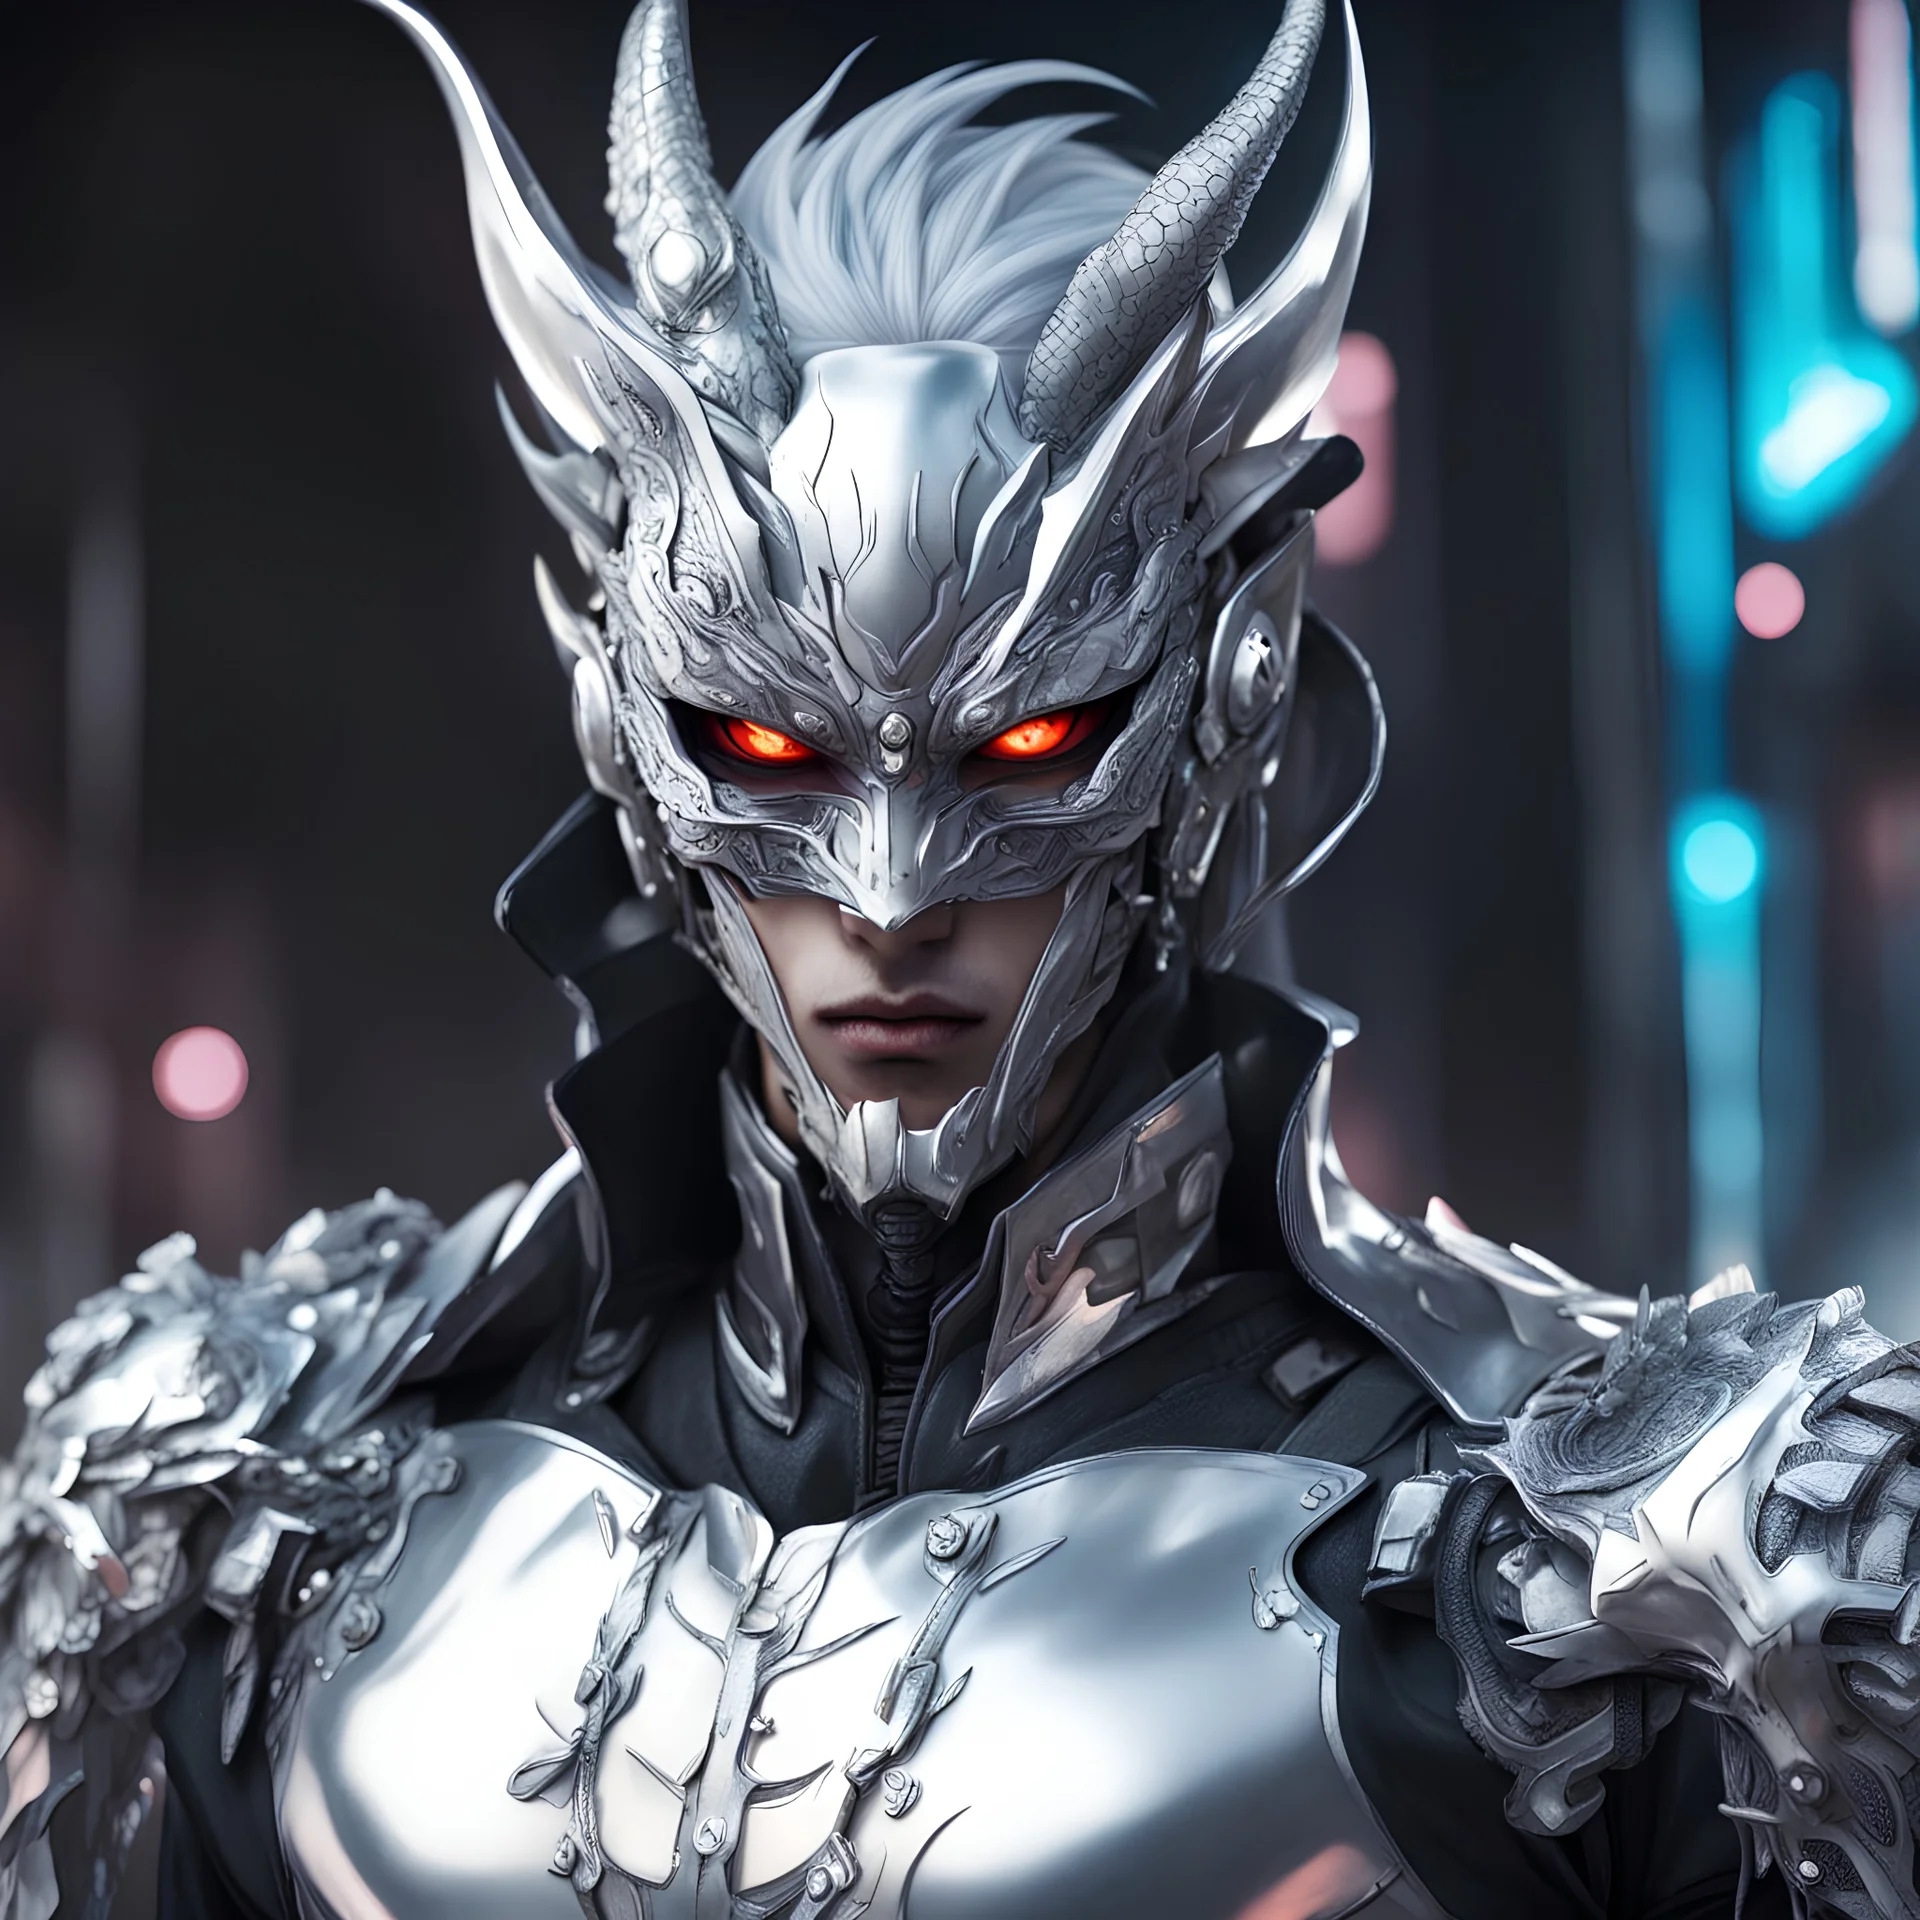 silver skinned anime Dragman cyberpunk with dragon mask in his eyes